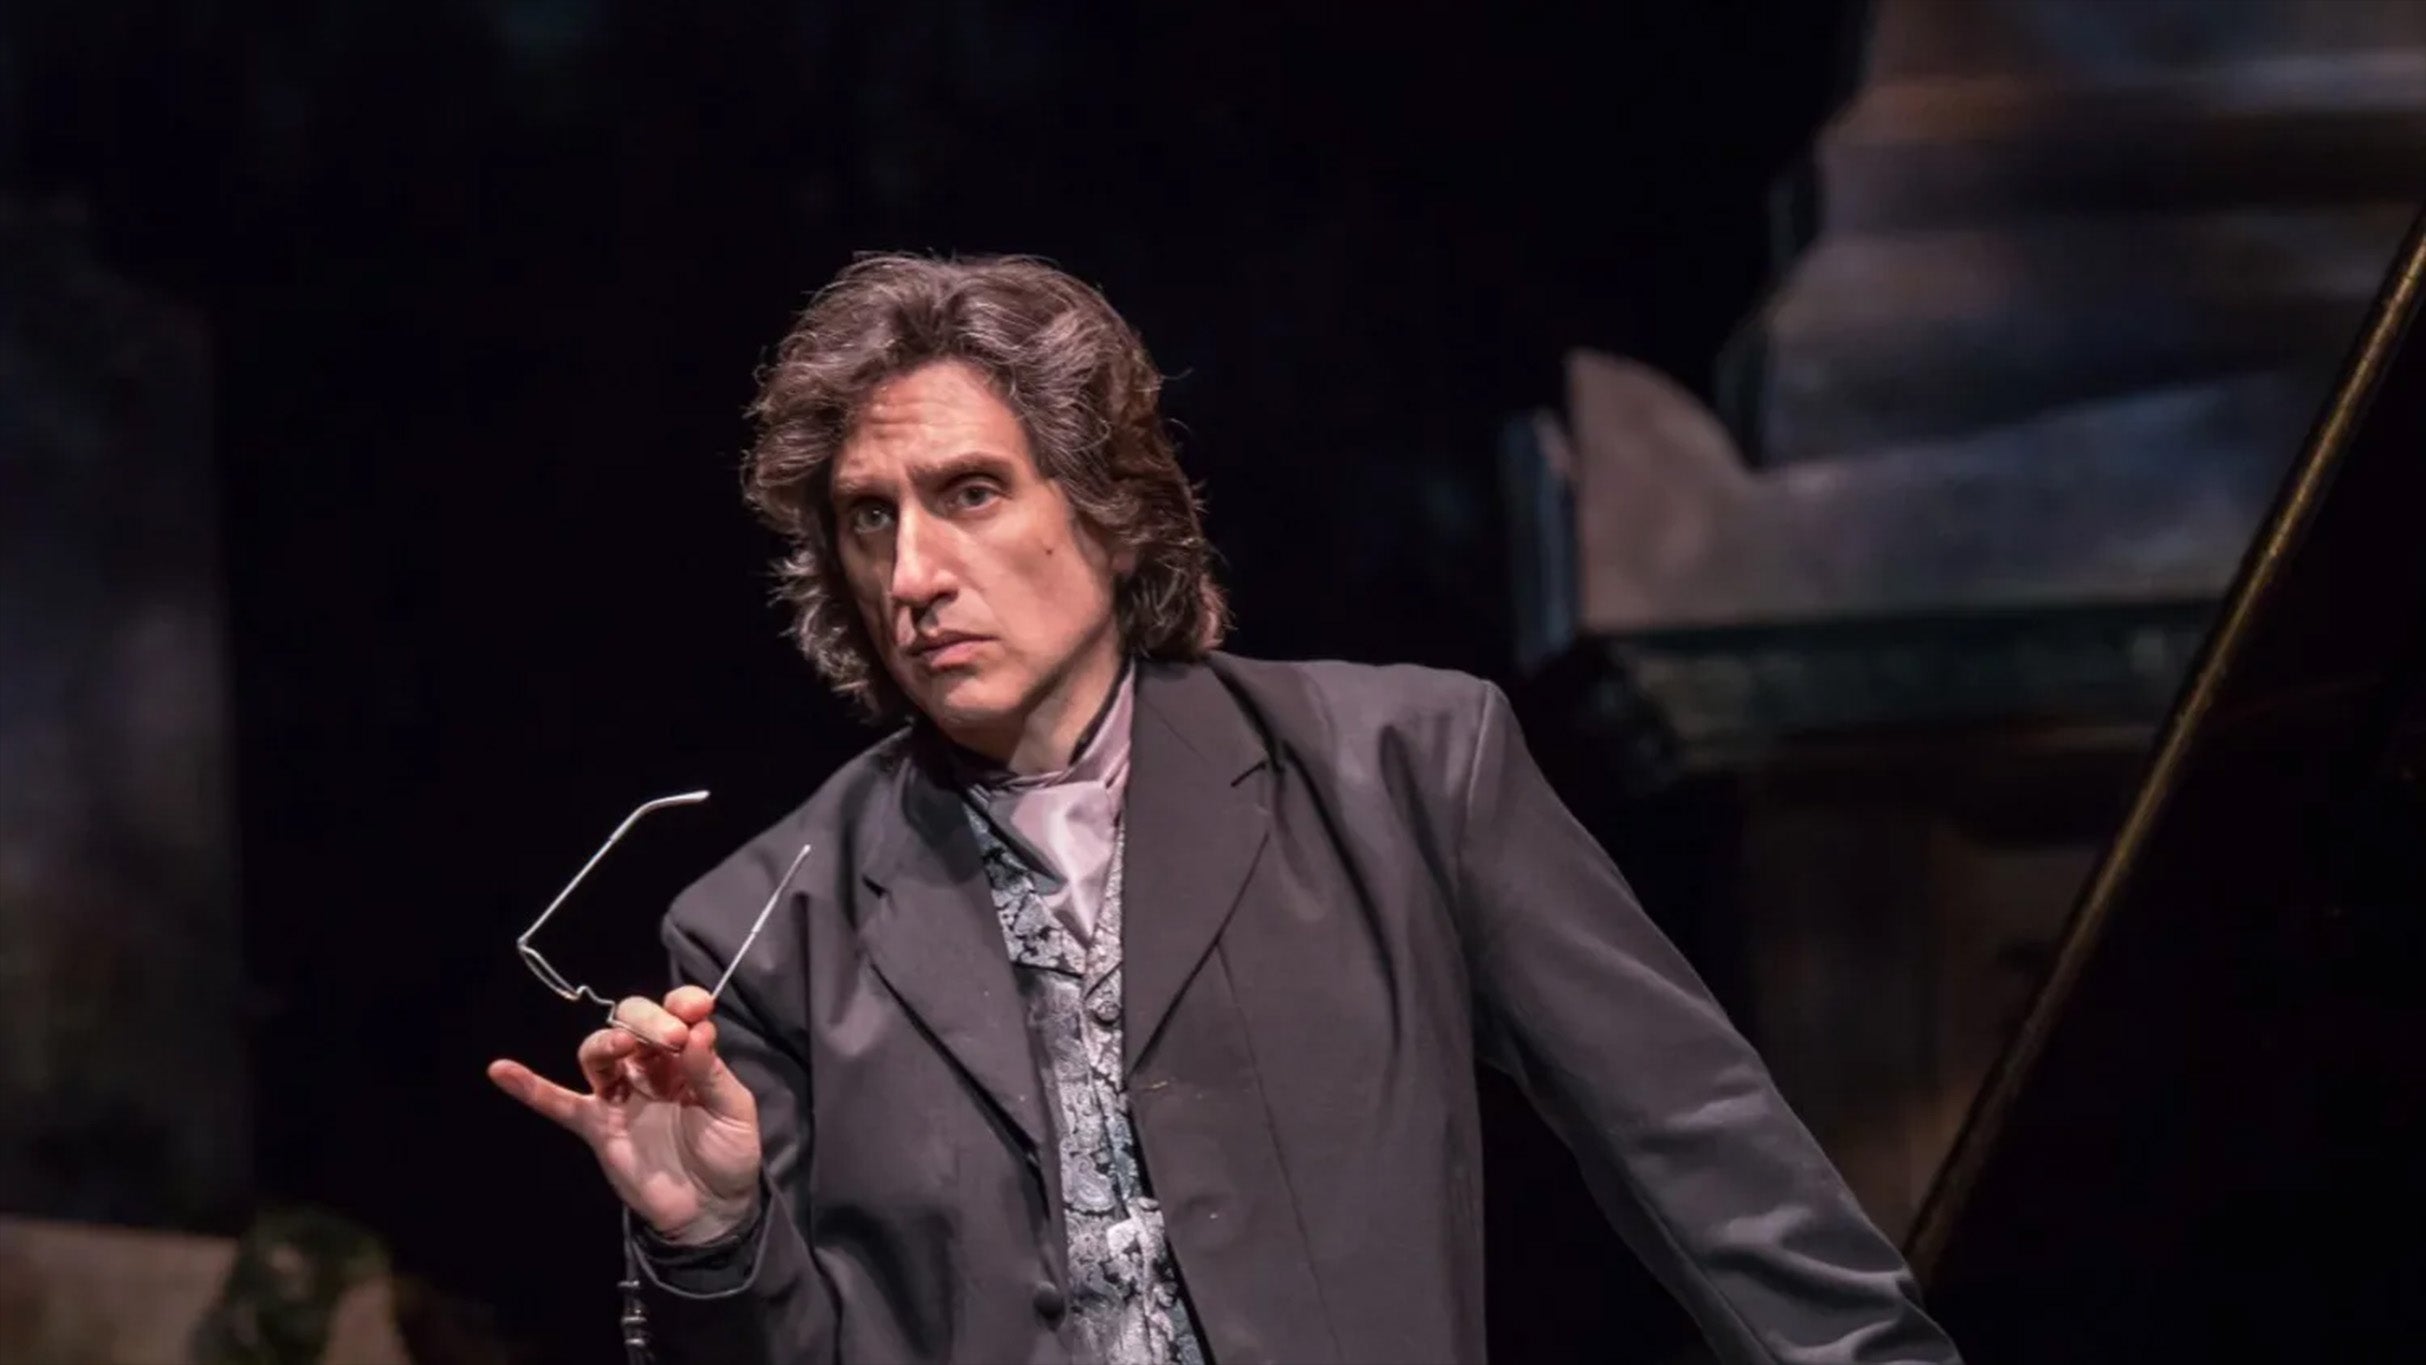 Balboa Theatre 100th - Featuring Hershey Felder in San Diego promo photo for Ticketmaster CEN Discount  presale offer code